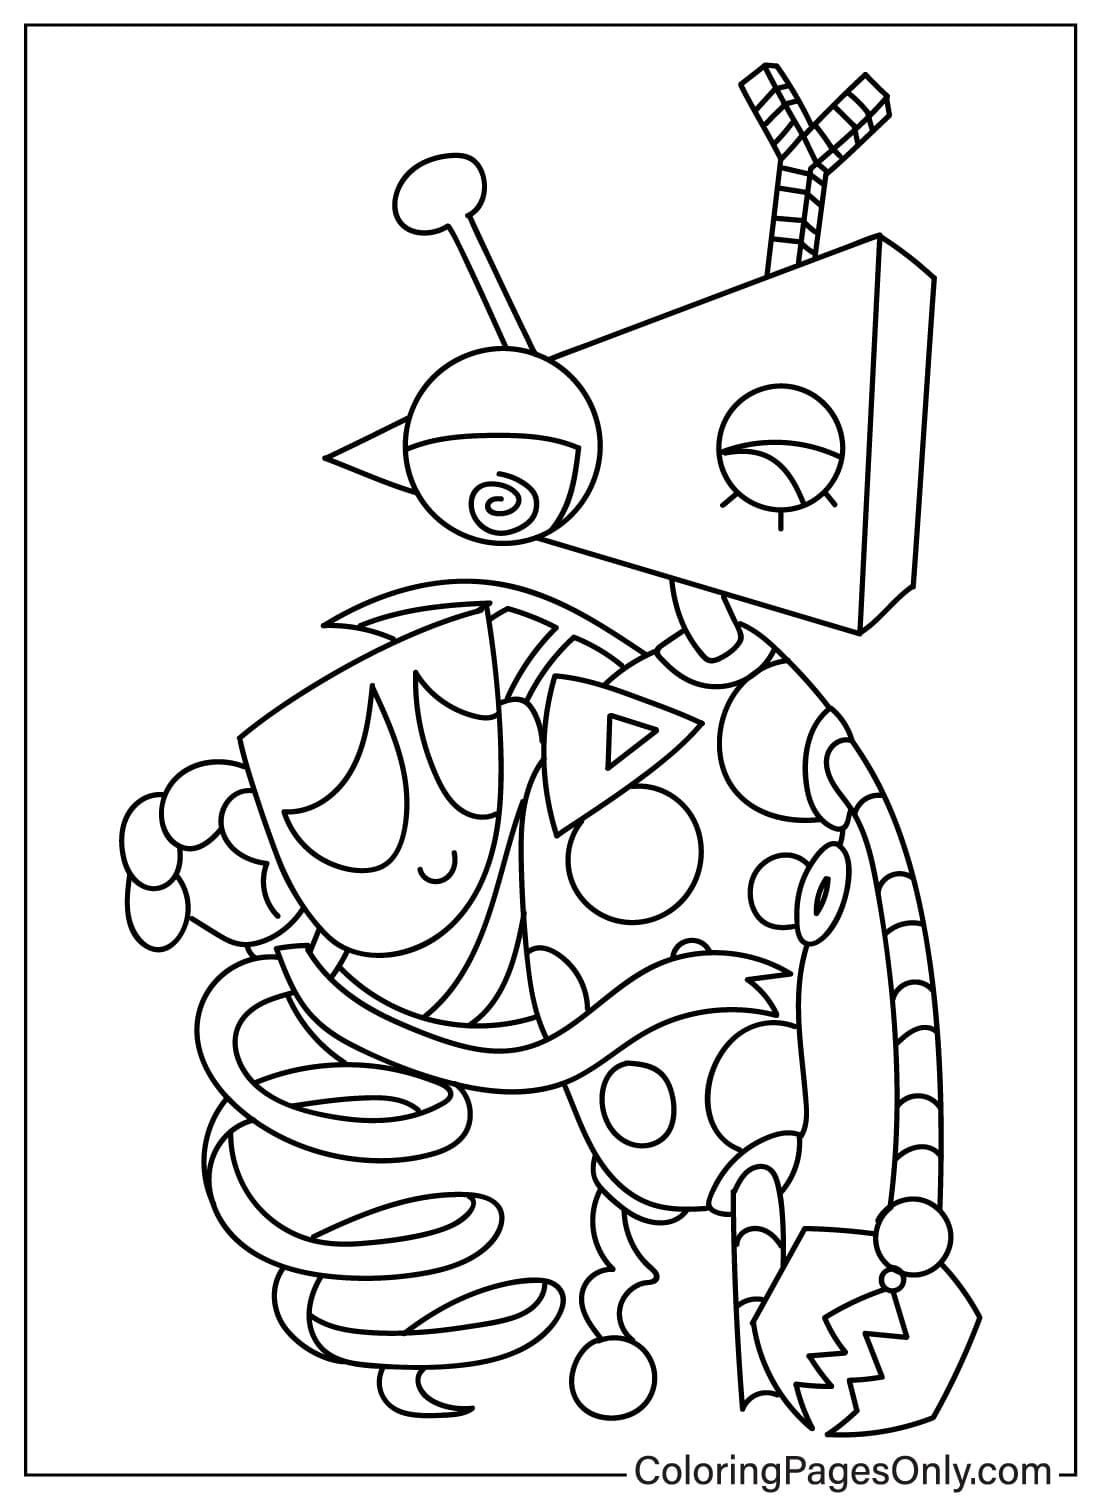 Gangle and Zooble Coloring Page from Gangle